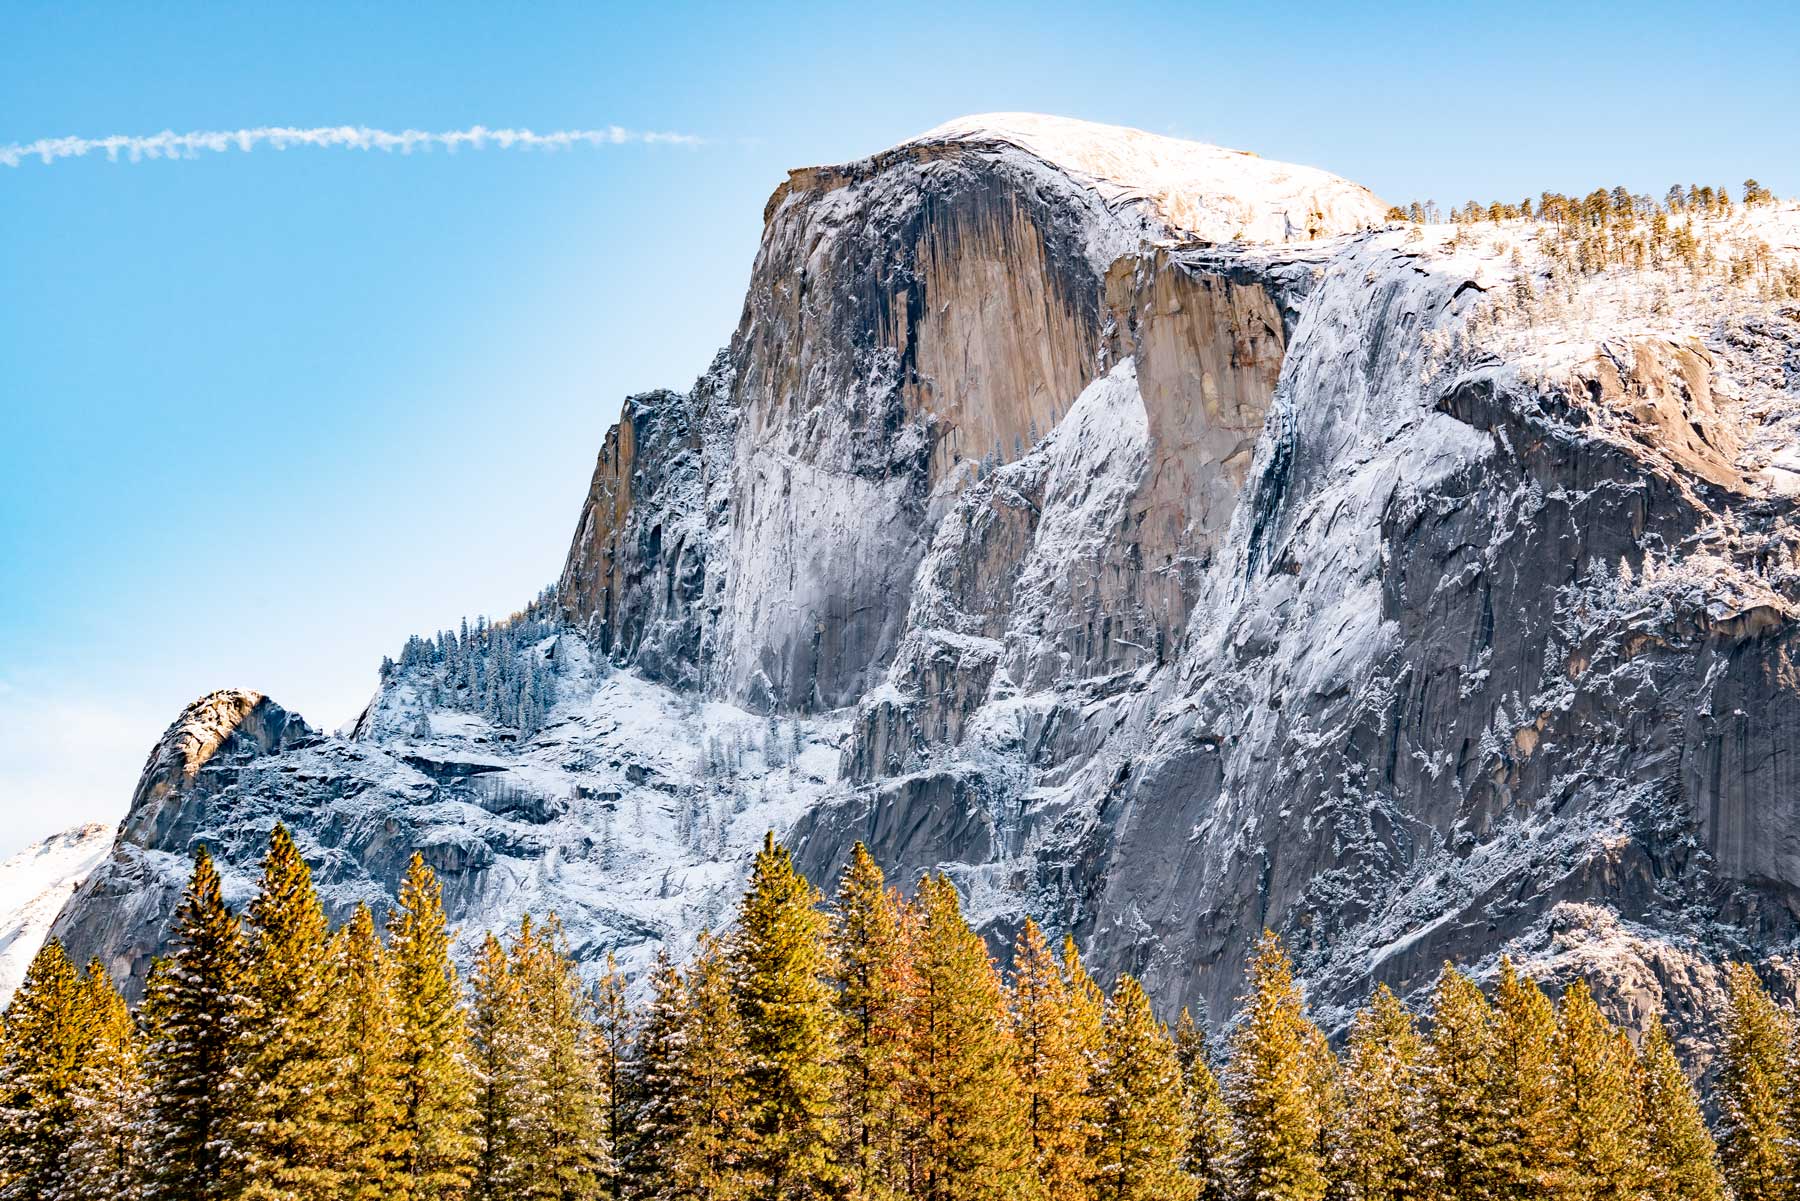 A wintery view of Half Dome with golden trees at the base and snow gathered on the edges of the rock.